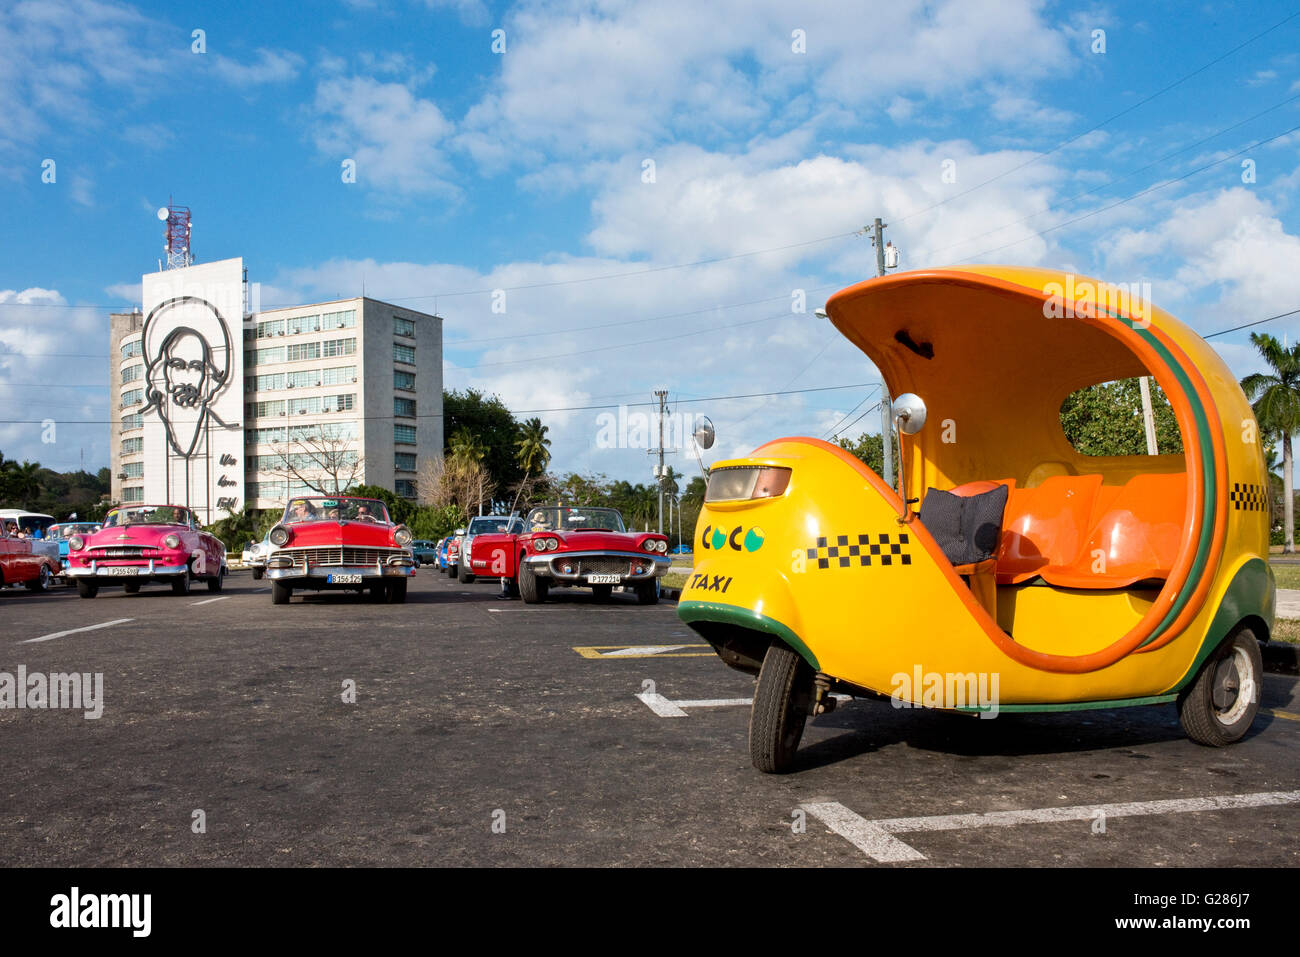 A coco taxi, American 1950's taxis middle and the image of Camilo Cienfuegos on the building background on revolution Square. Stock Photo